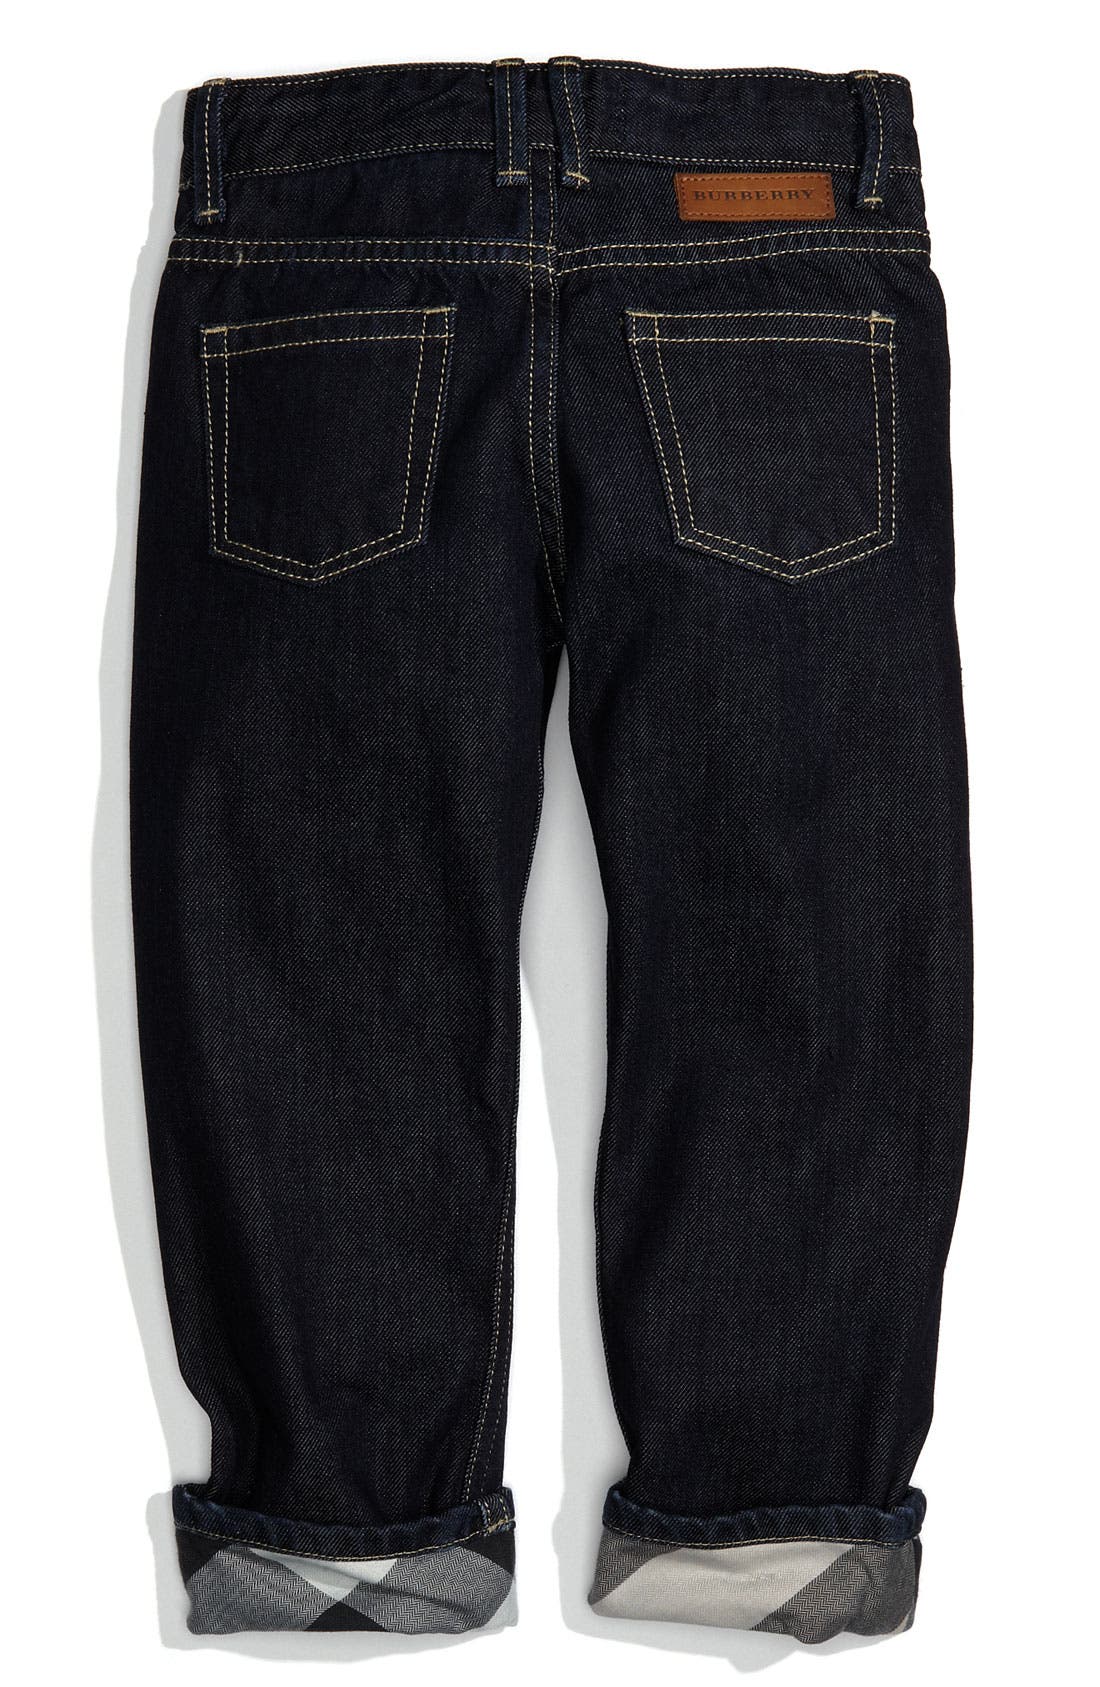 burberry toddler jeans